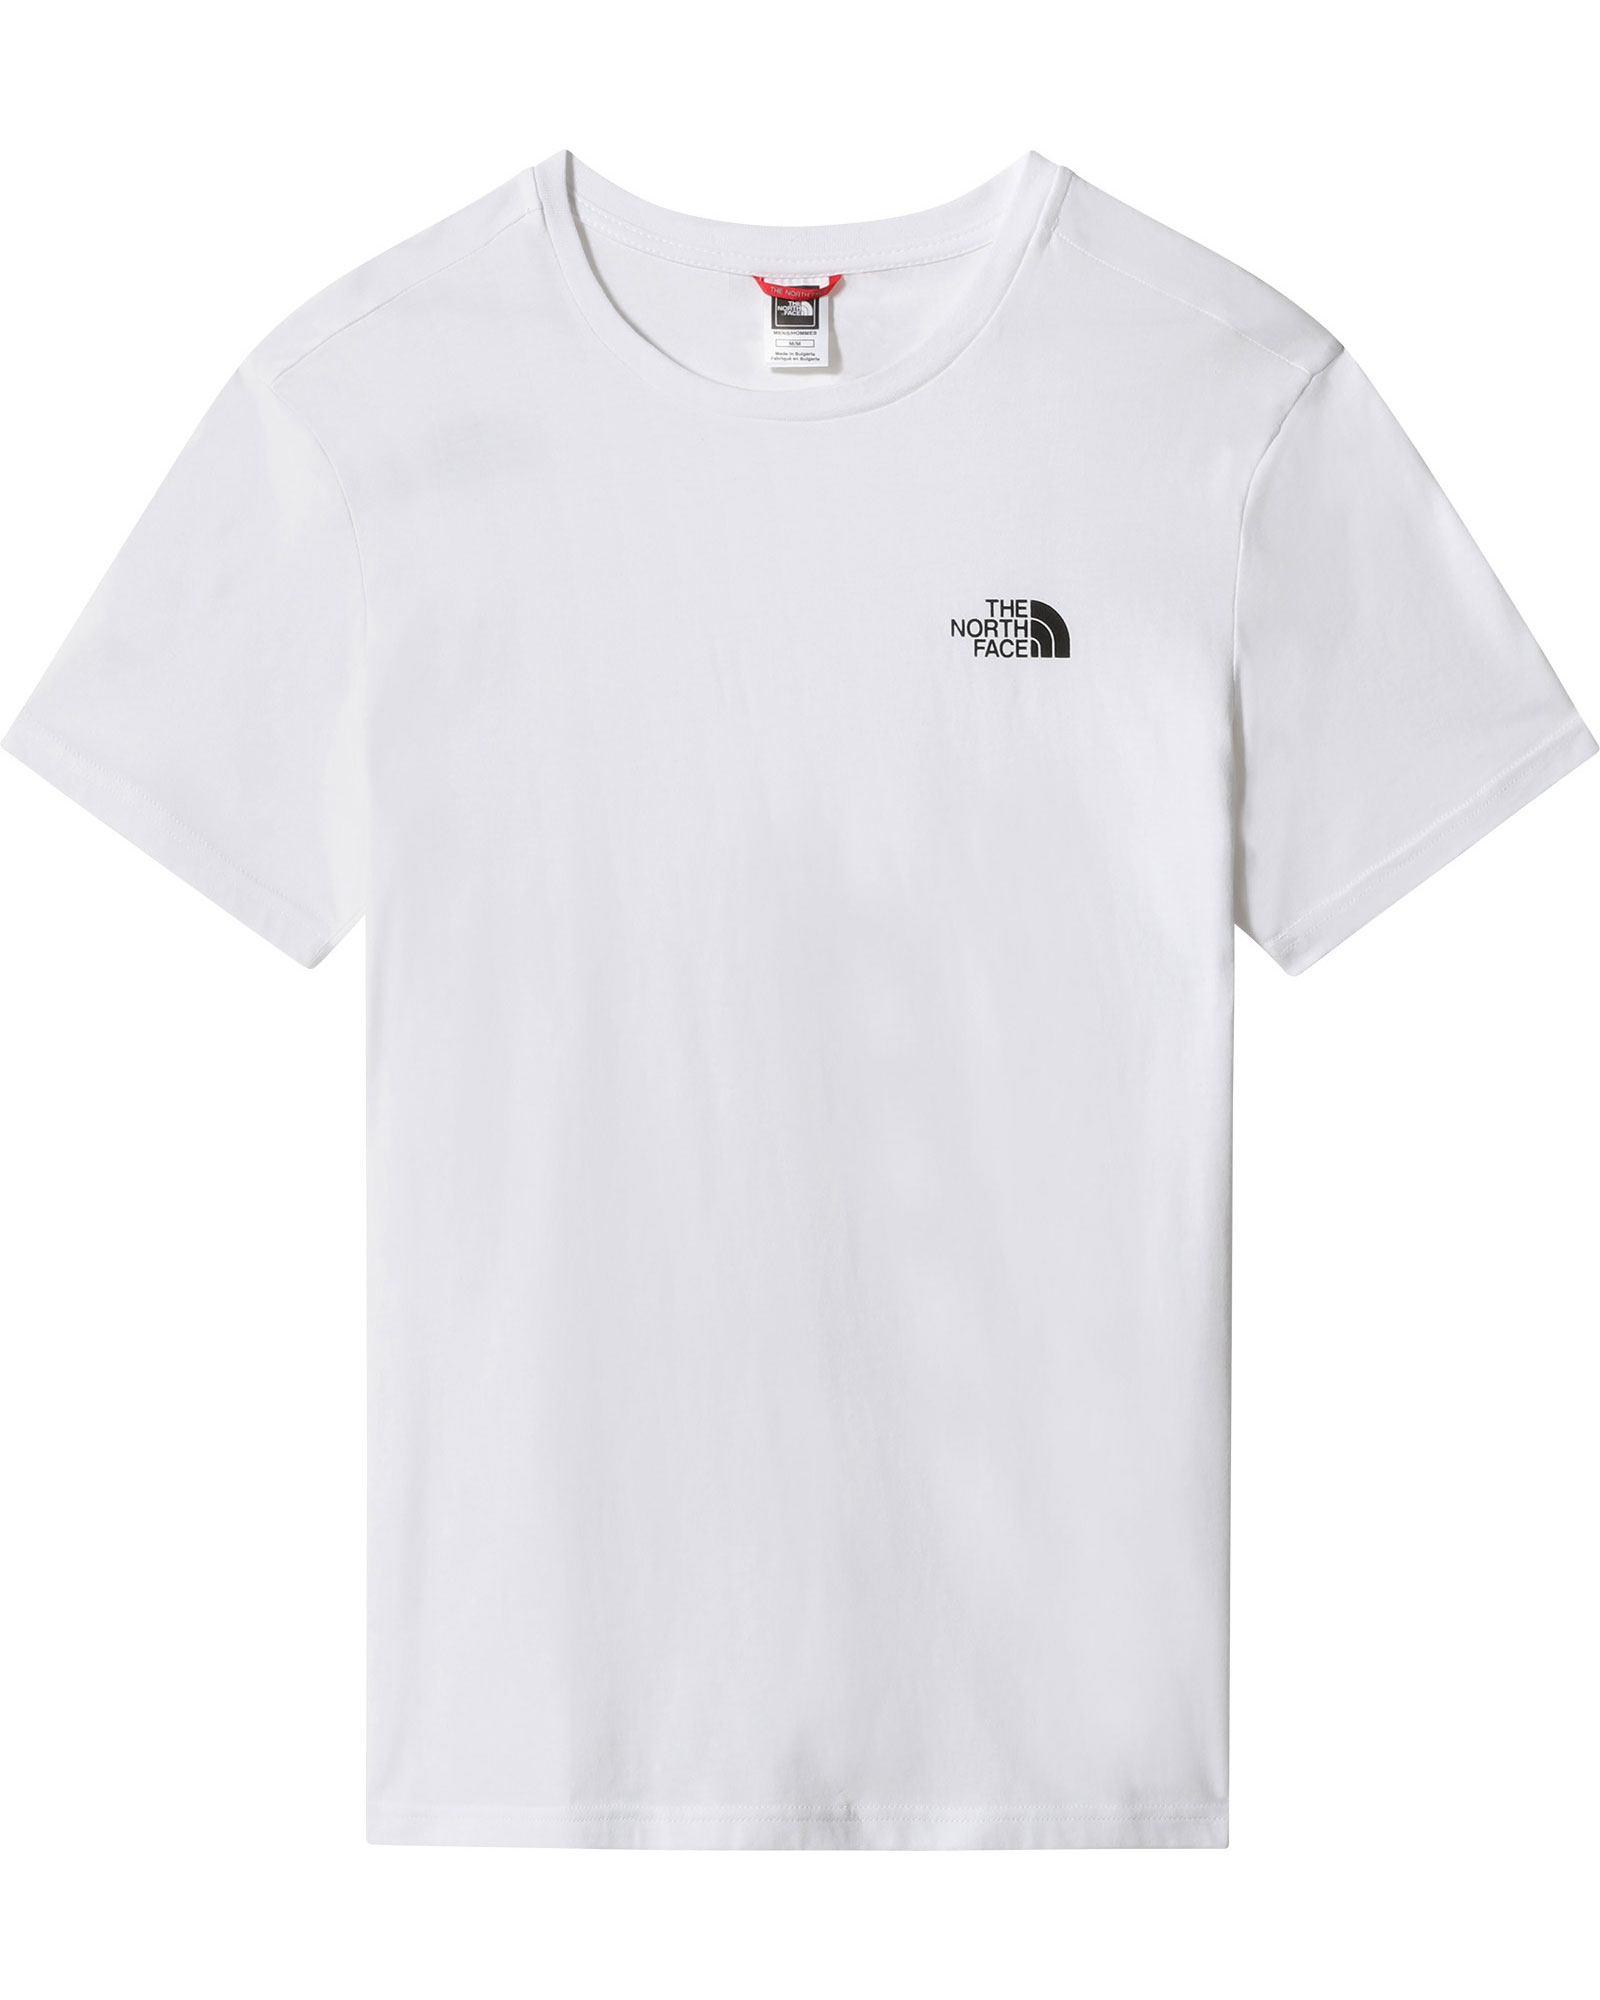 The North Face Simple Dome Men’s T Shirt - TNF White M